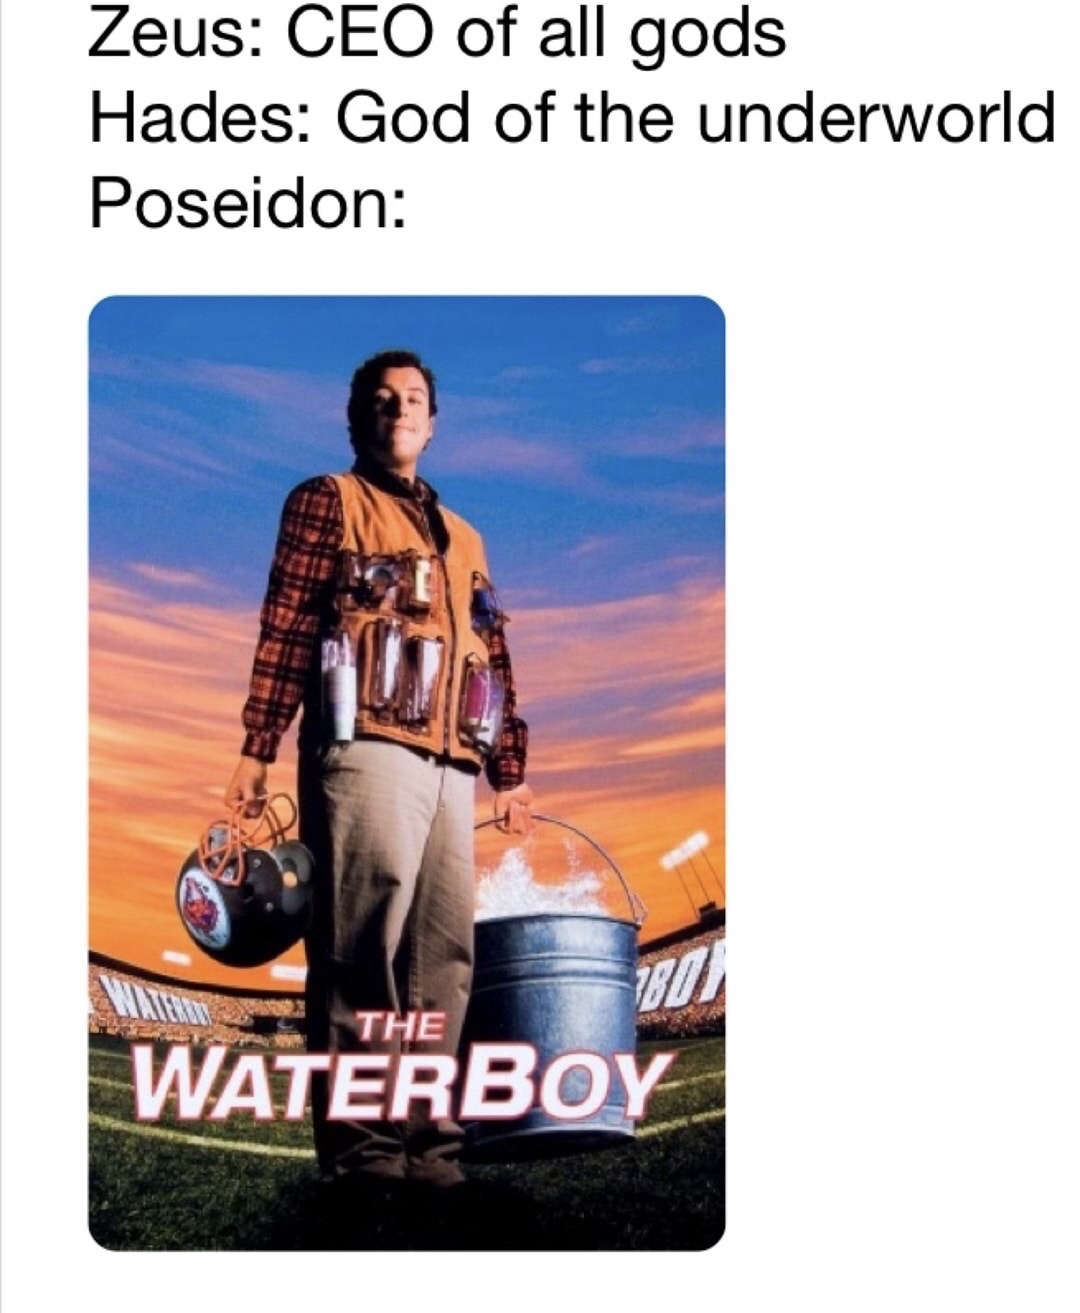 waterboy movie poster - Zeus Ceo of all gods Hades God of the underworld Poseidon Lan The Waterboy